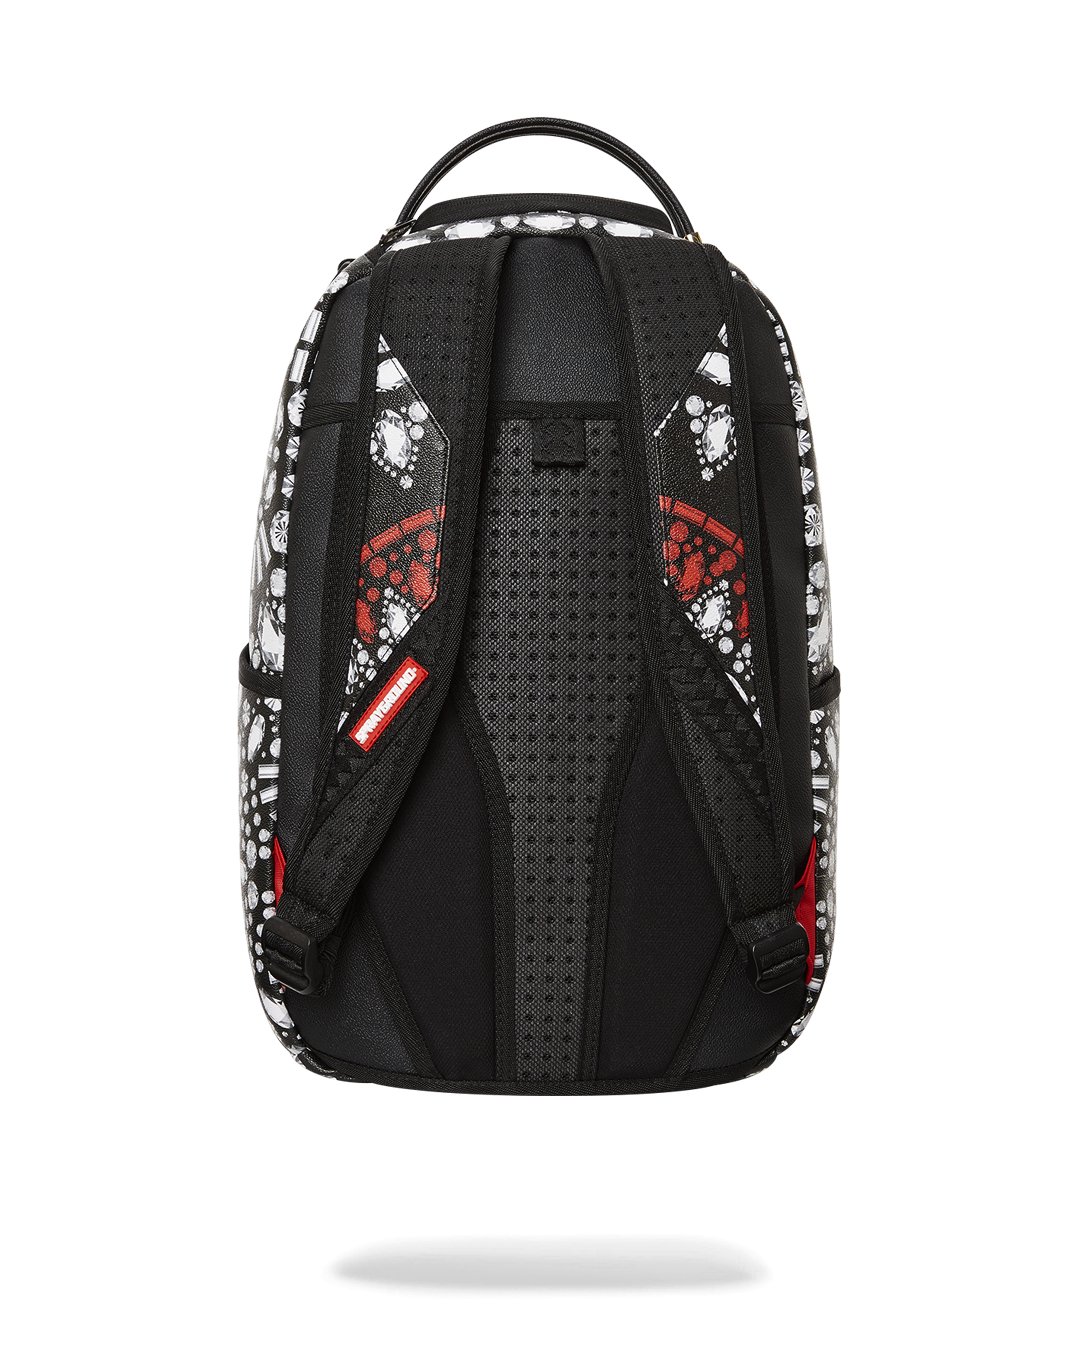 Sprayground Backpack Winners Take All Limited Edition Shark - Red and Blue